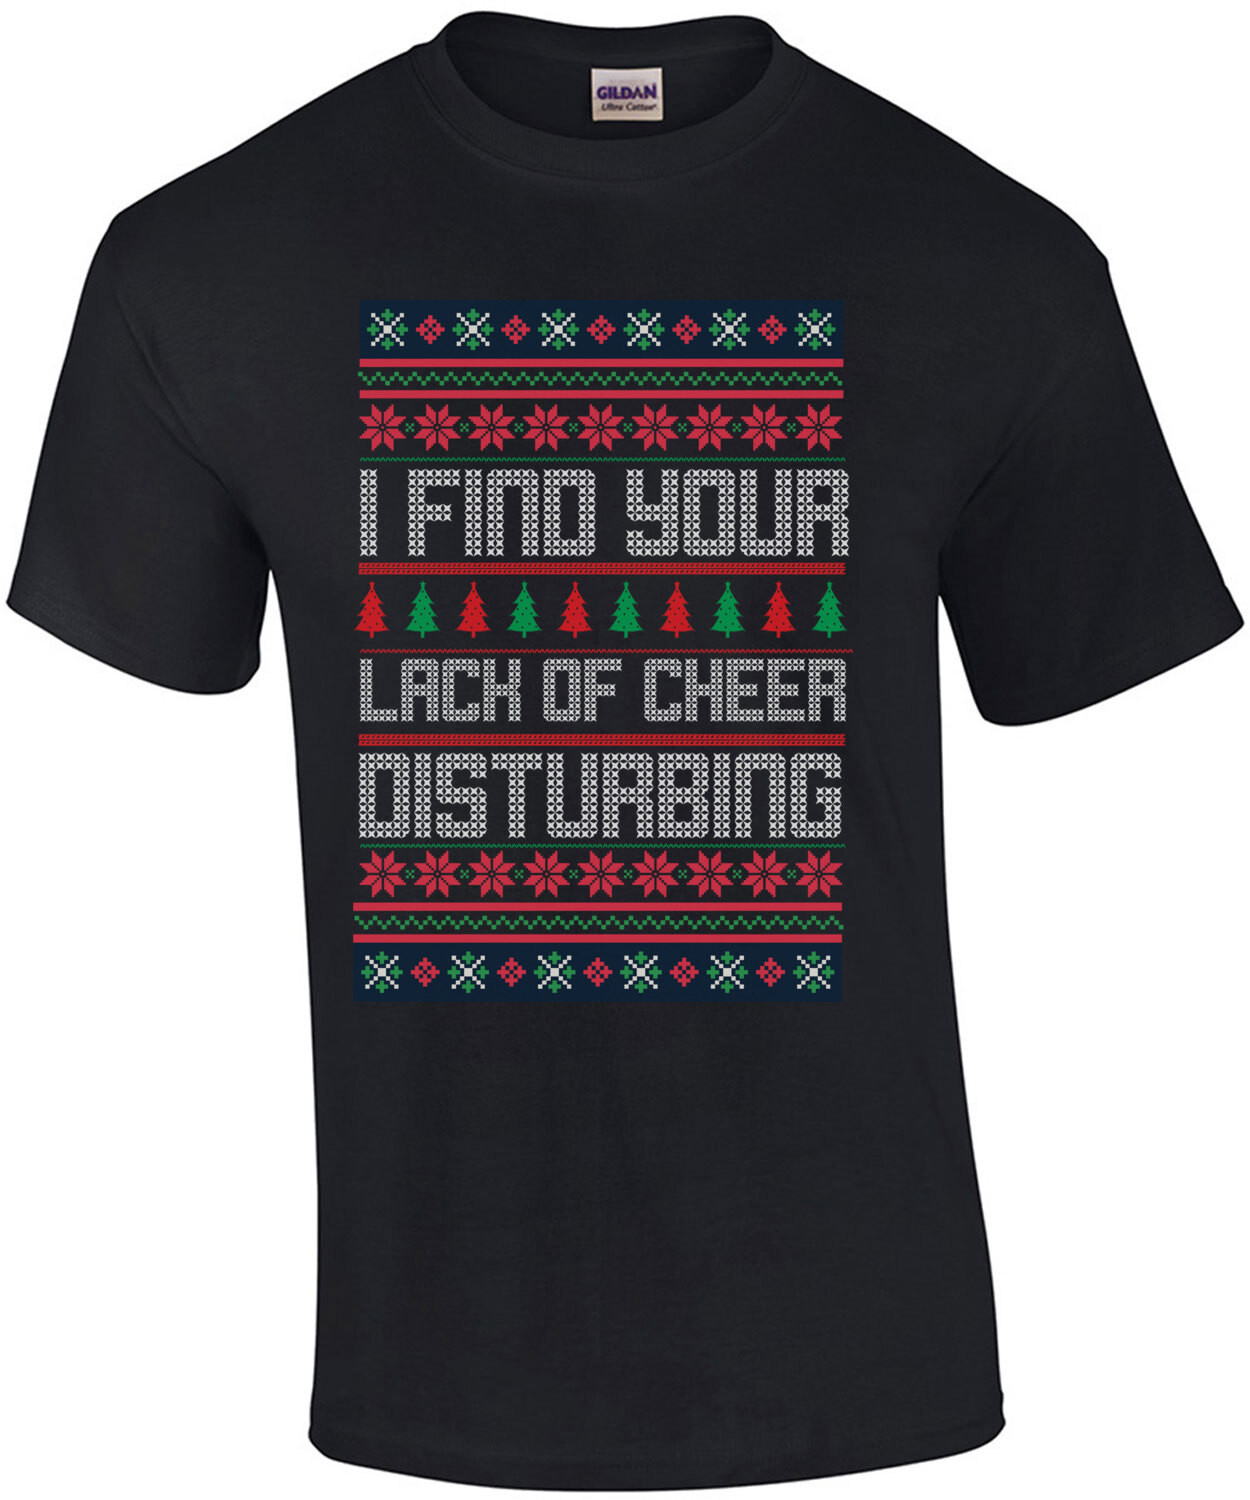 I Find Your Lack of Cheer Disturbing Ugly Christmas Sweater